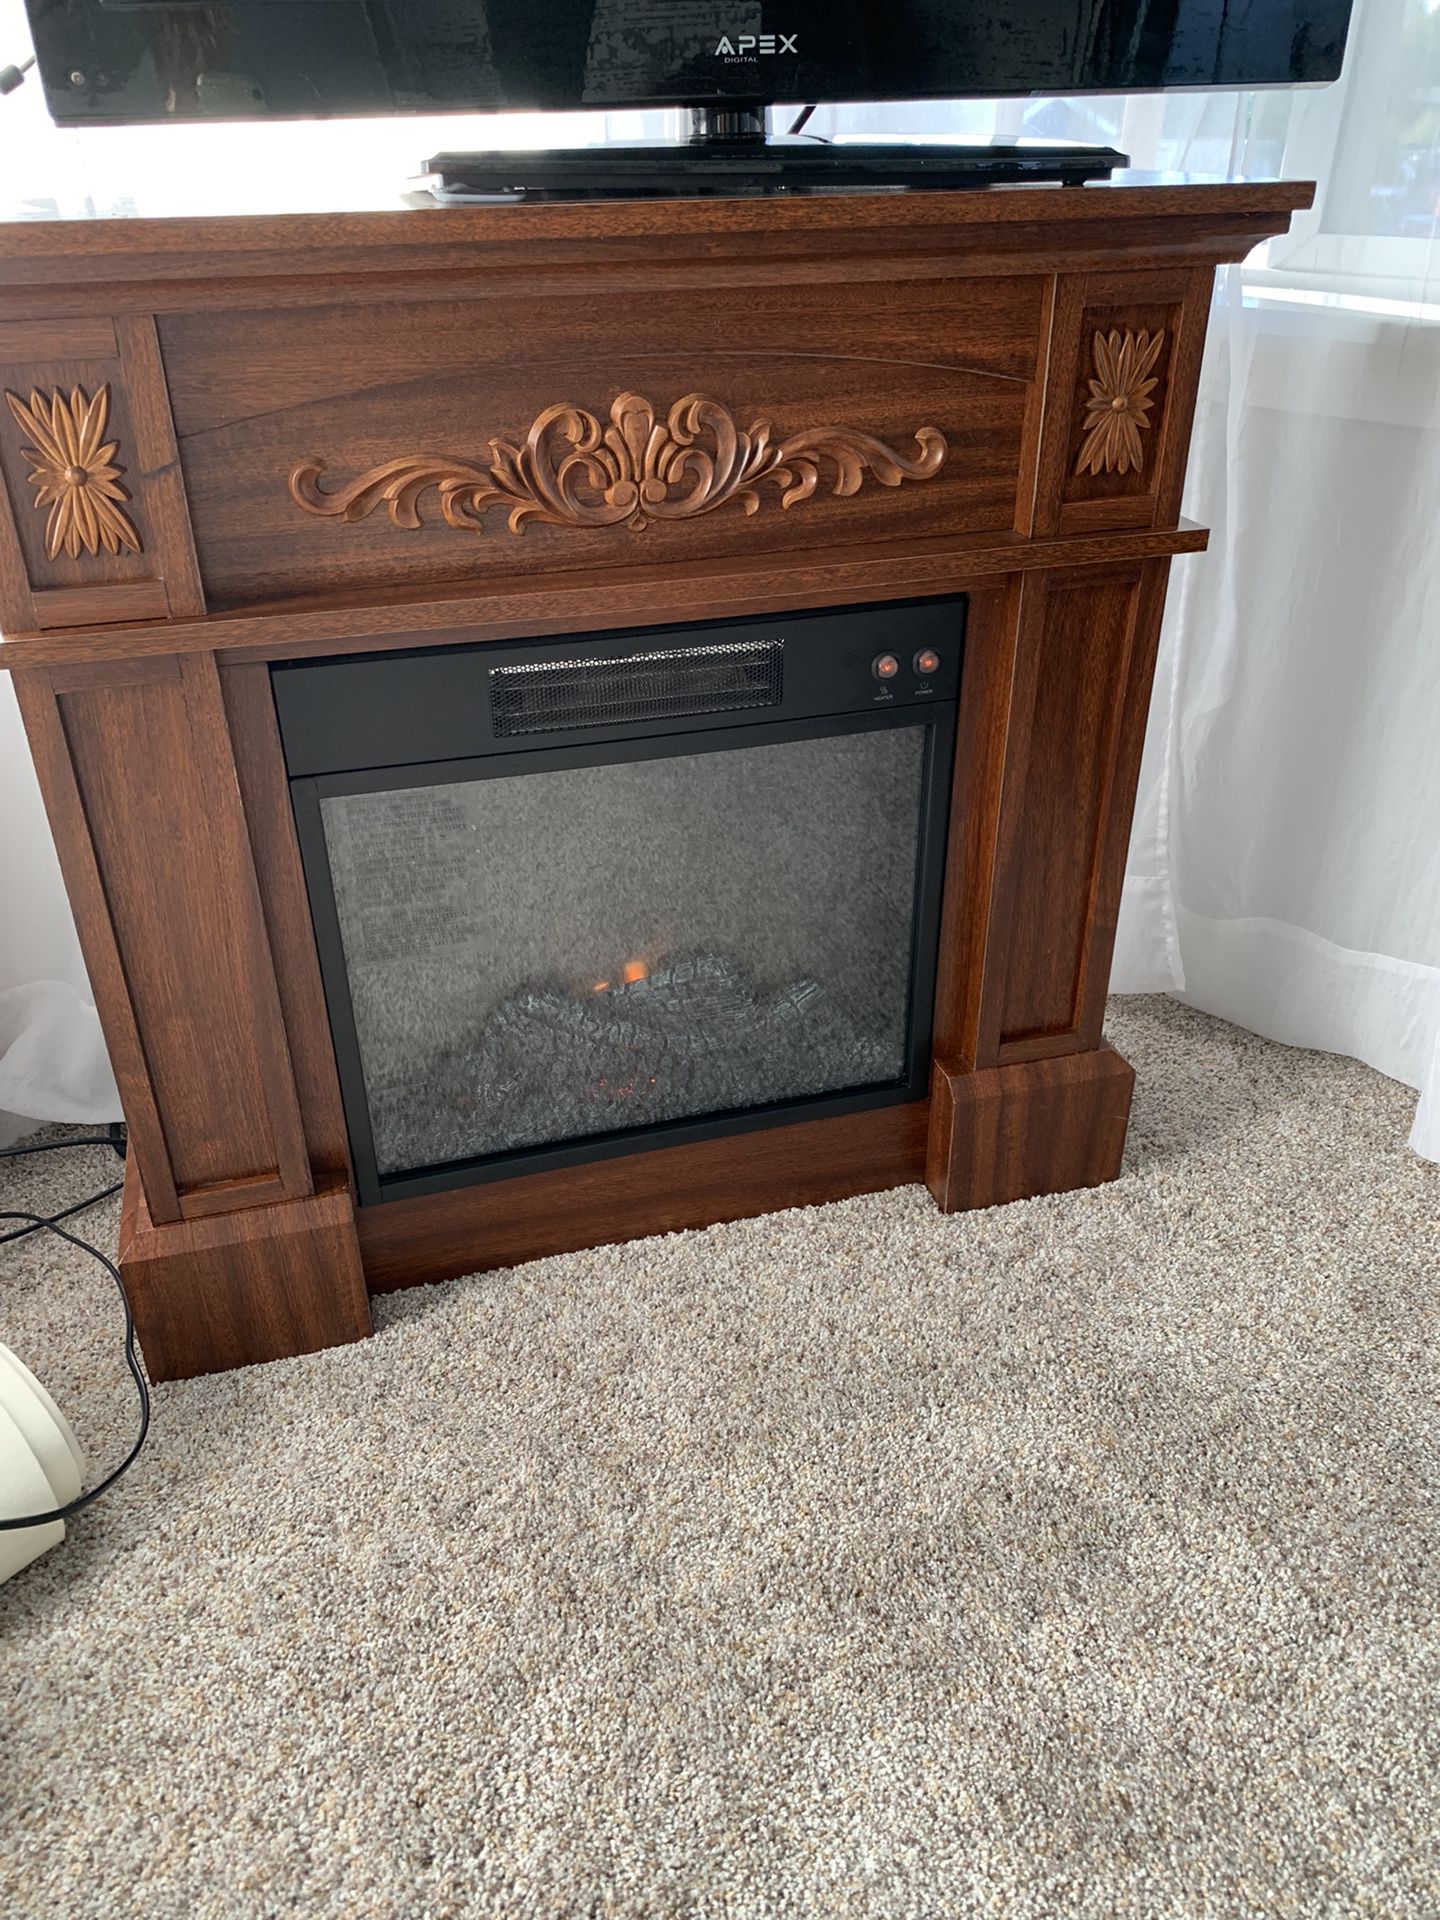 Electric fire place w/ blower.